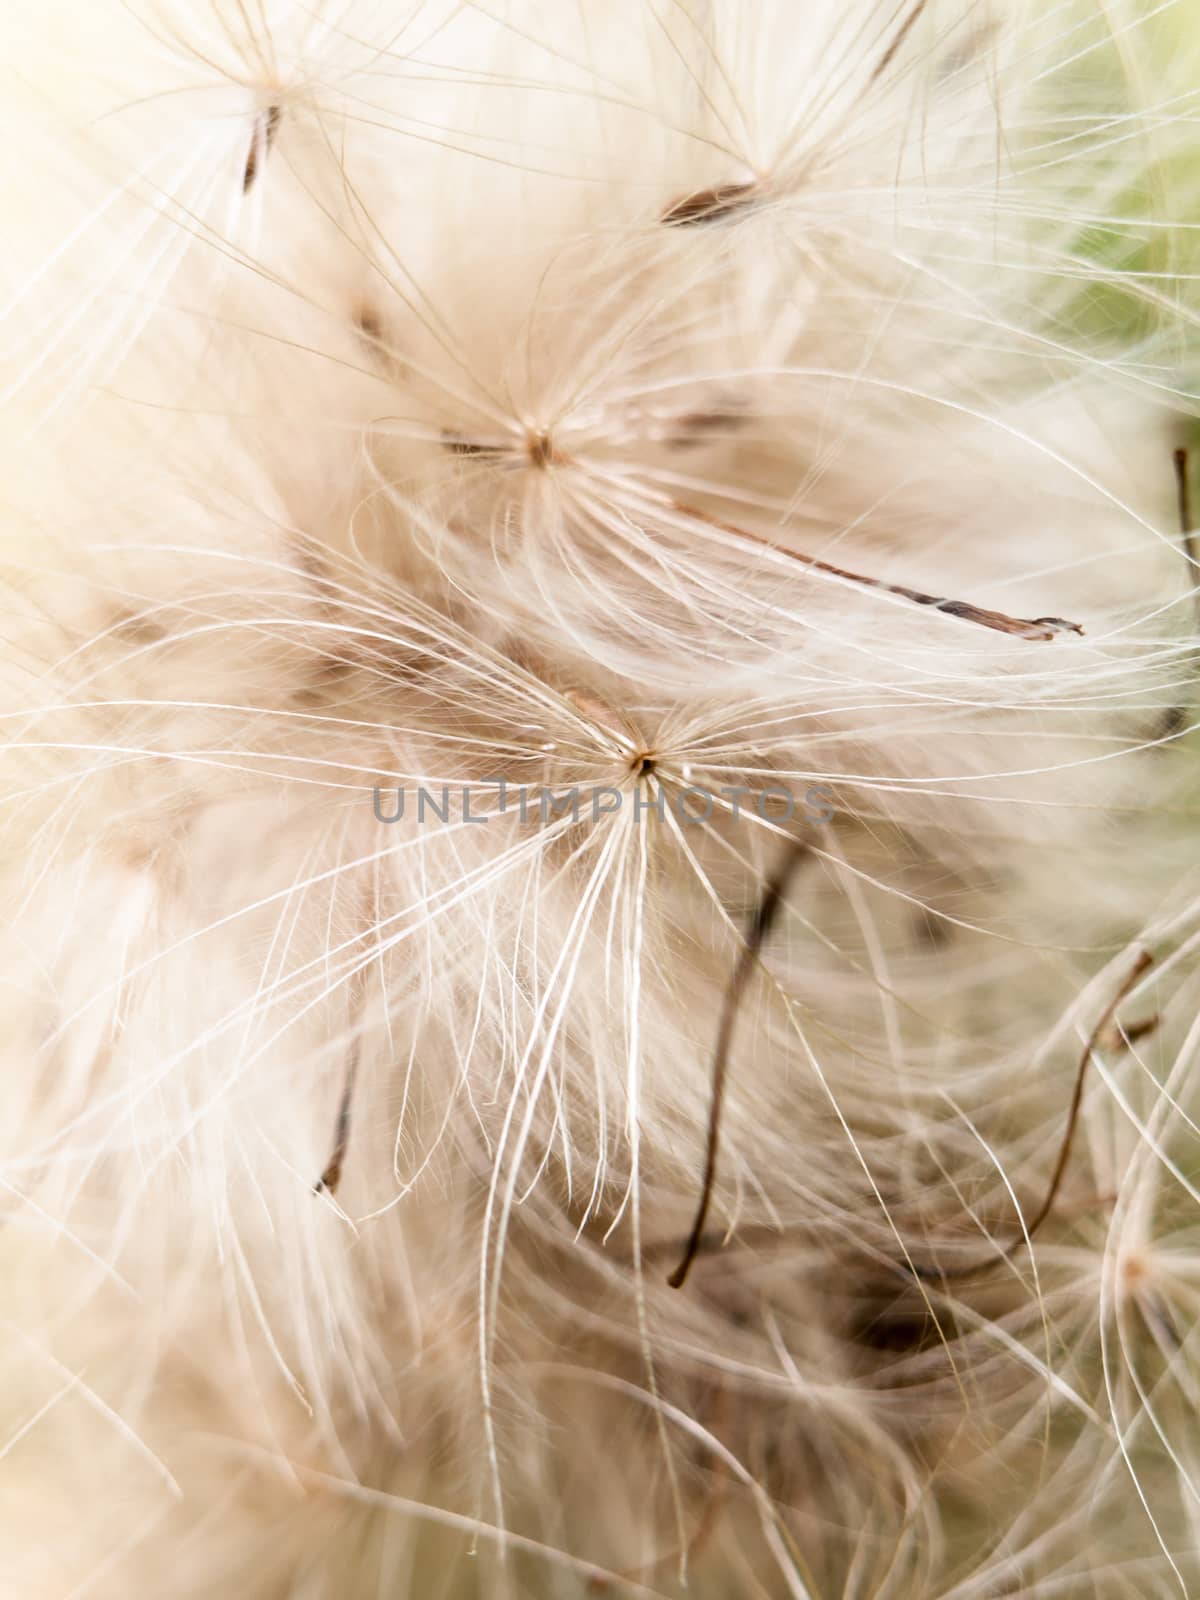 close up detail furry fluffy white milk thistle strands backgrou by callumrc